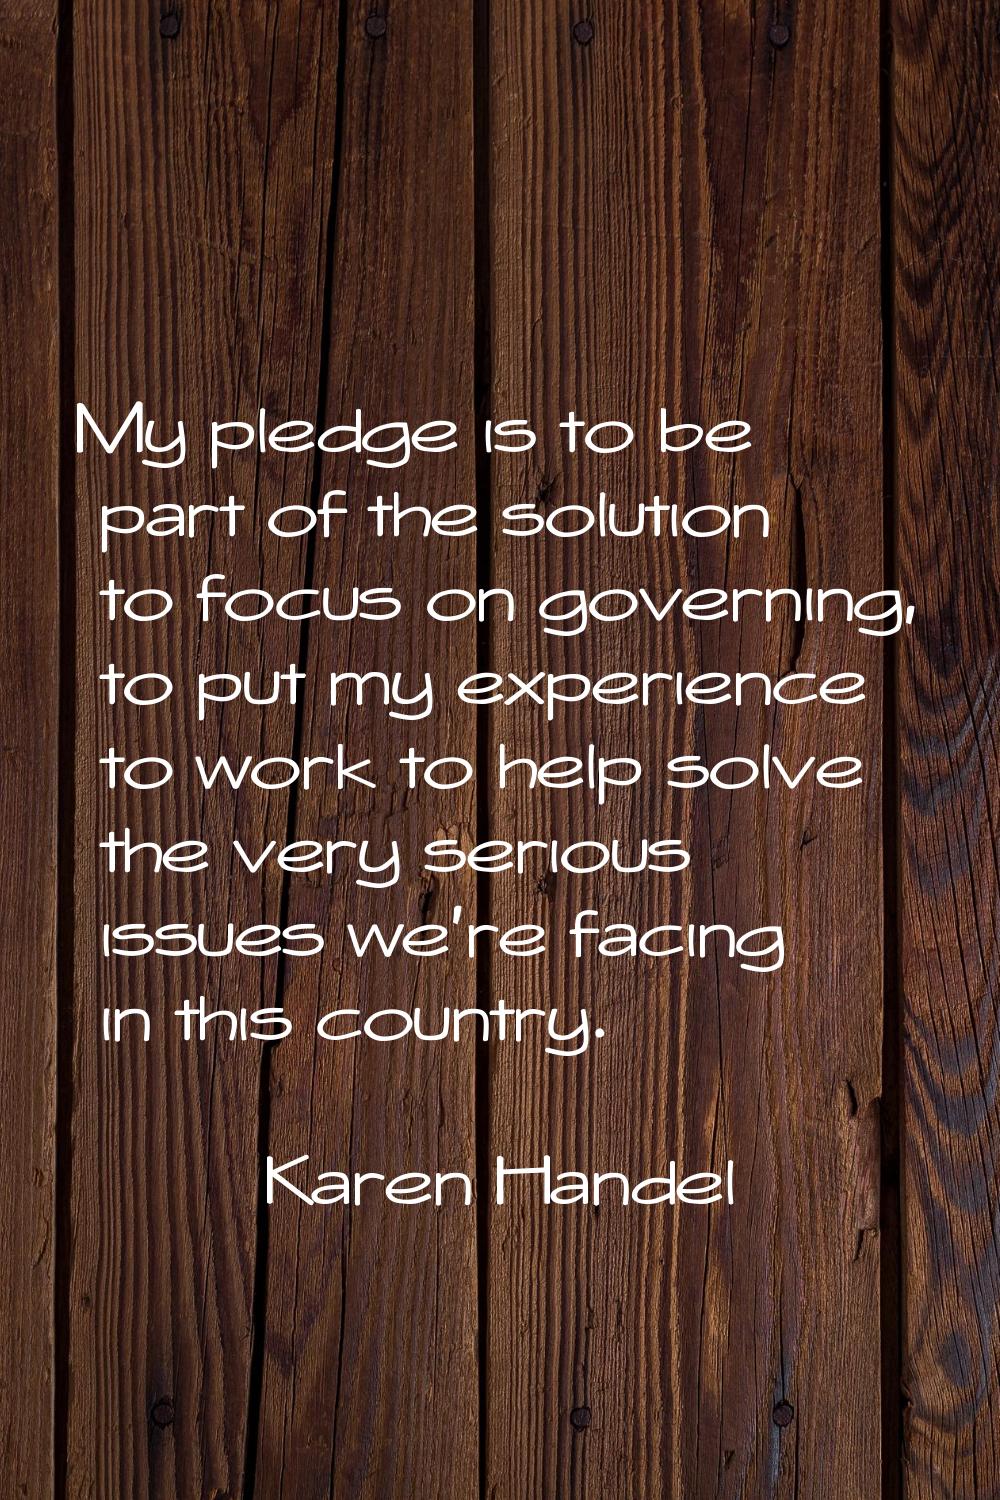 My pledge is to be part of the solution to focus on governing, to put my experience to work to help